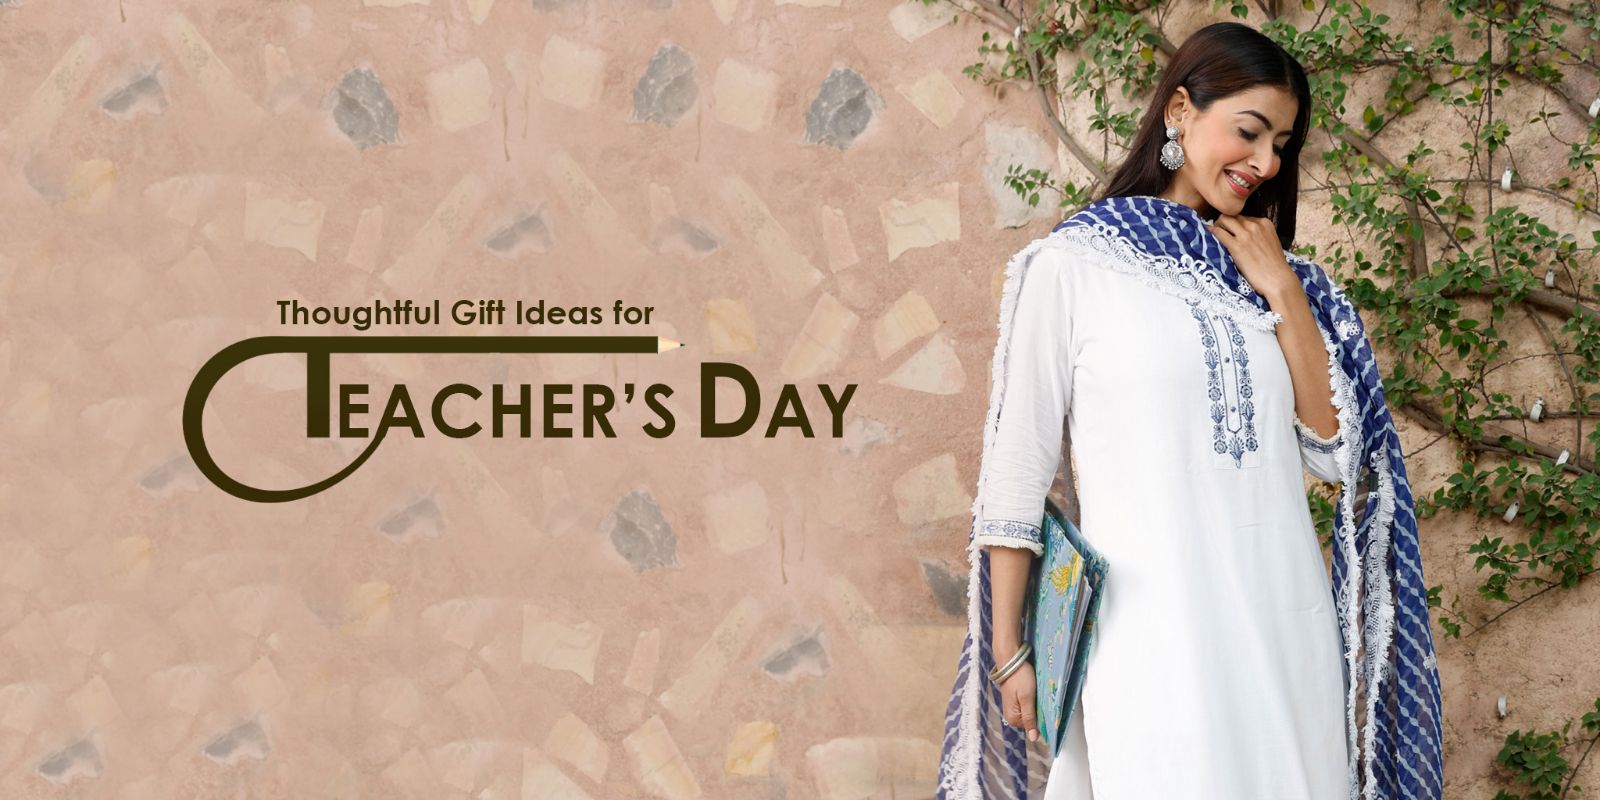 Thoughtful Gift Ideas To Show Your Appreciation On Teacher’s Day